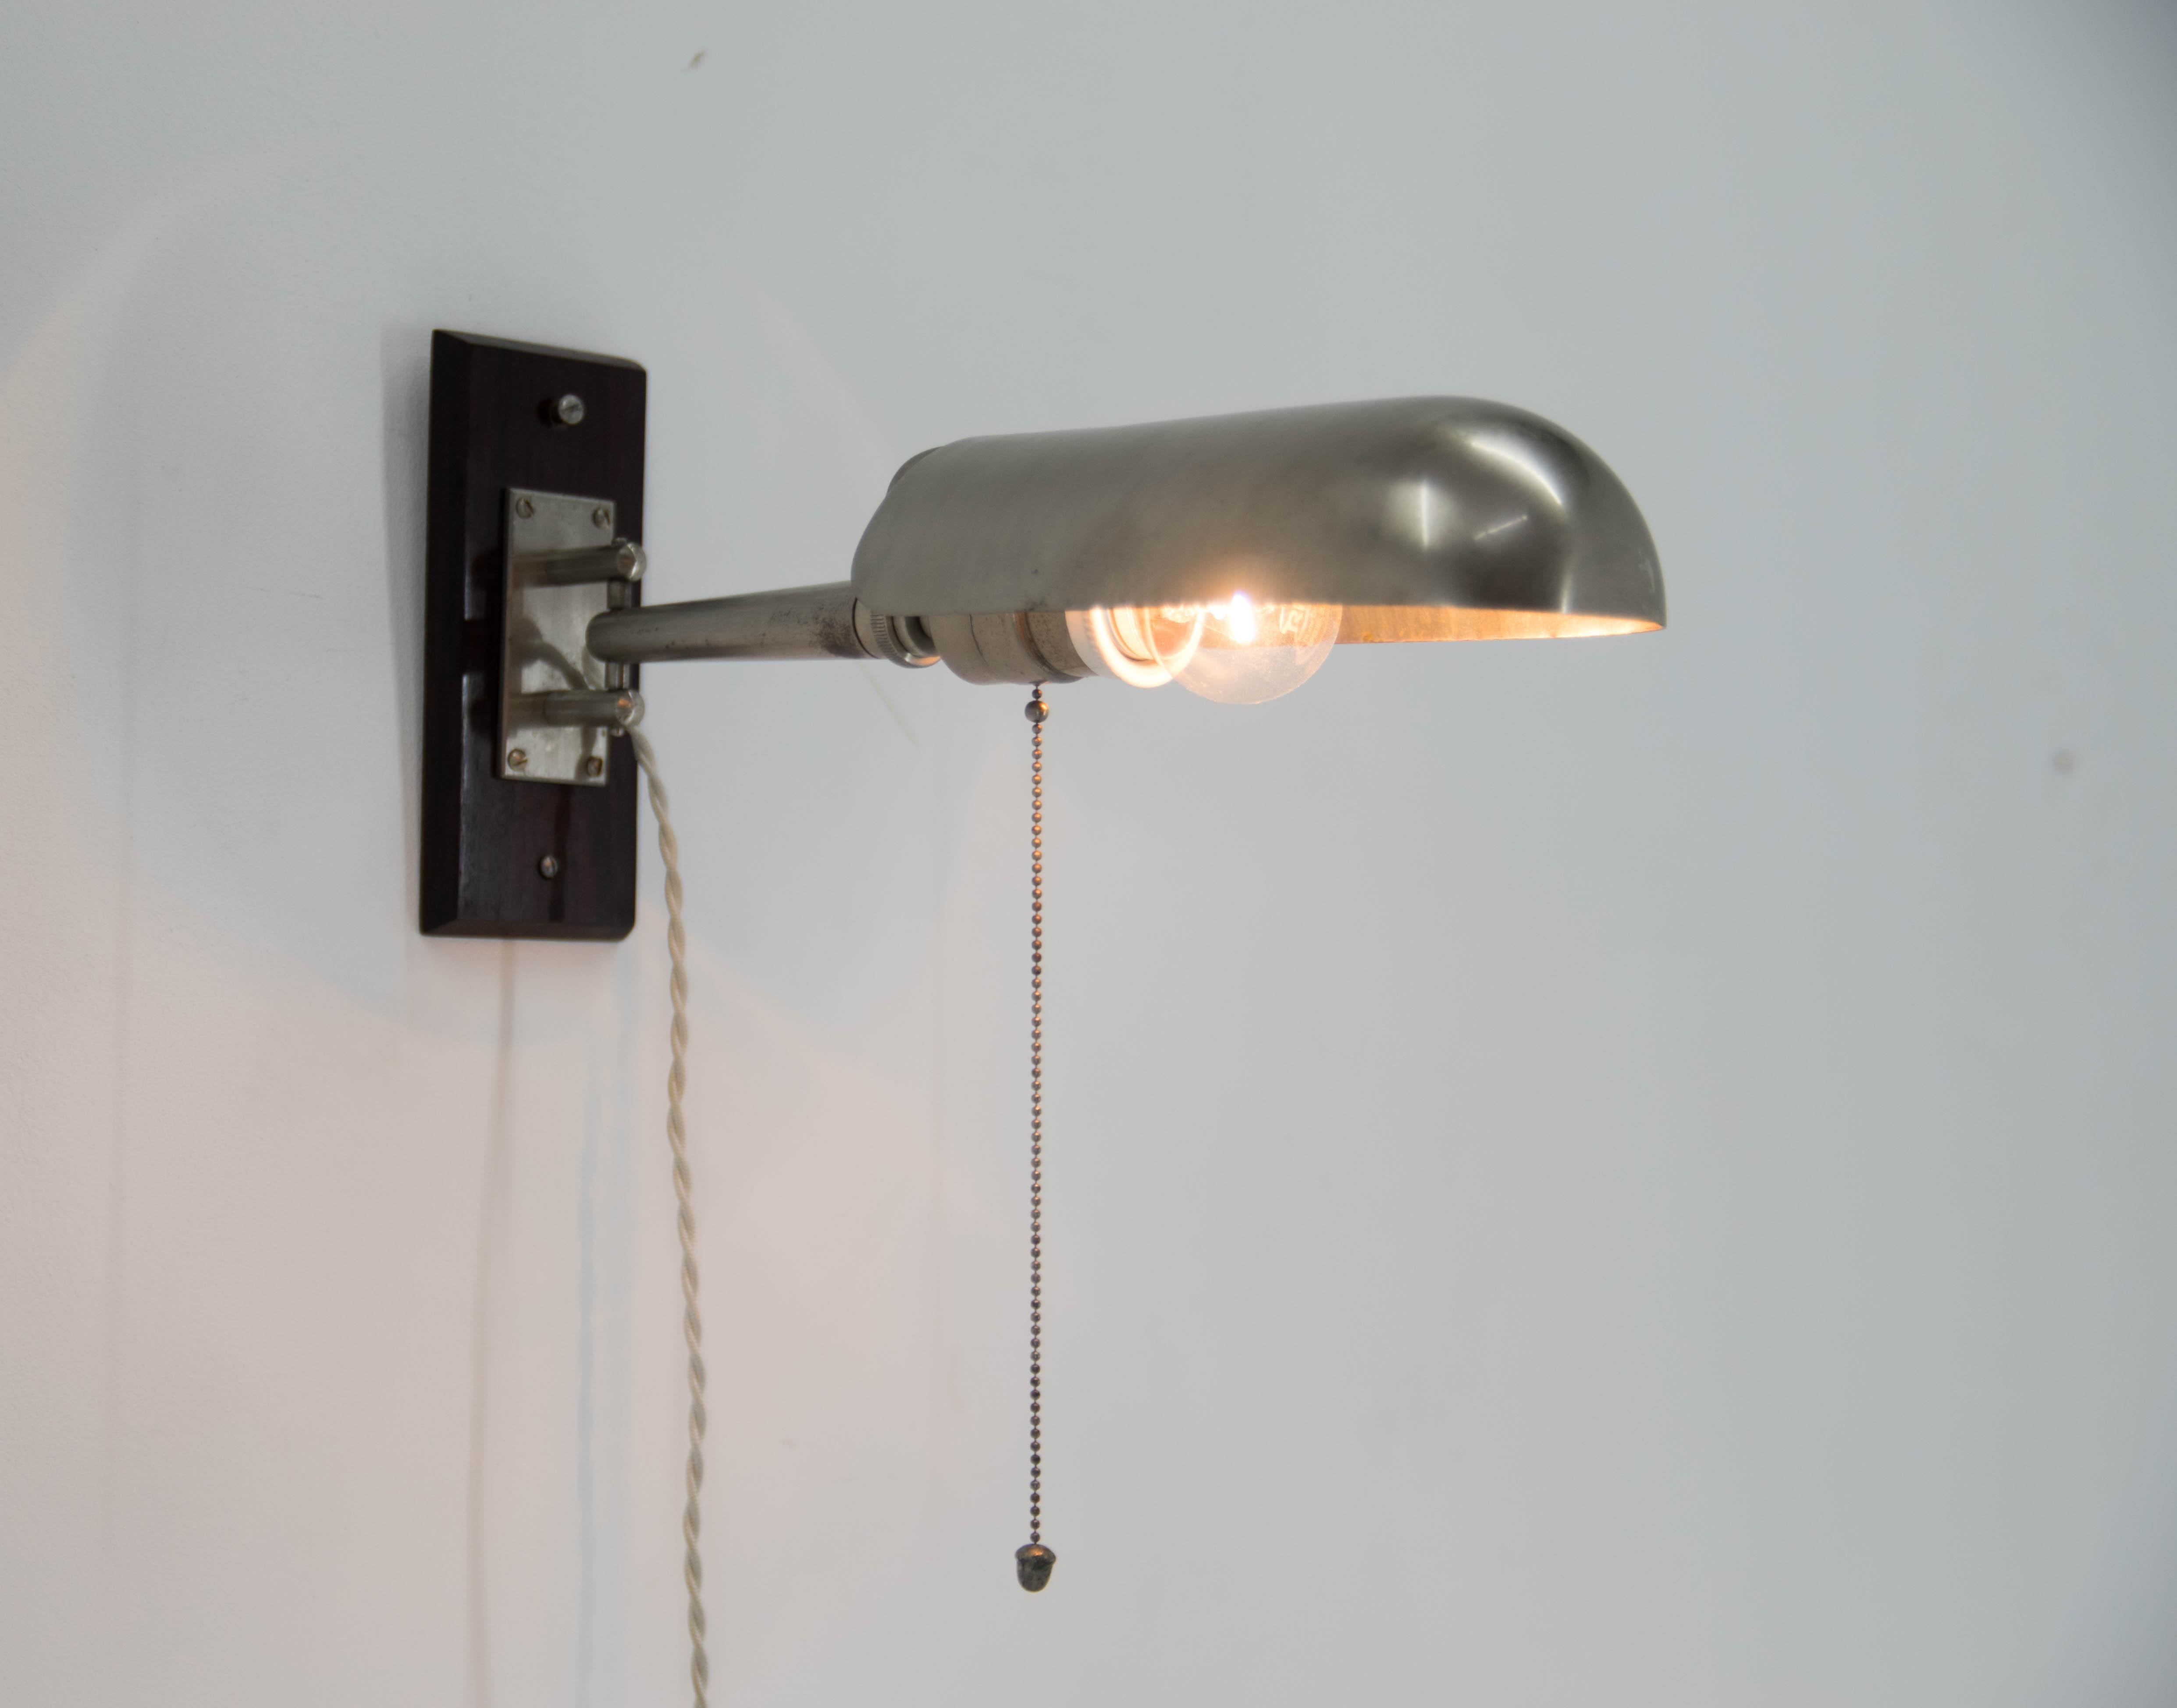 Bauhaus Rare Functionalist Wall Lamp with Rotating Shade, 1920s For Sale